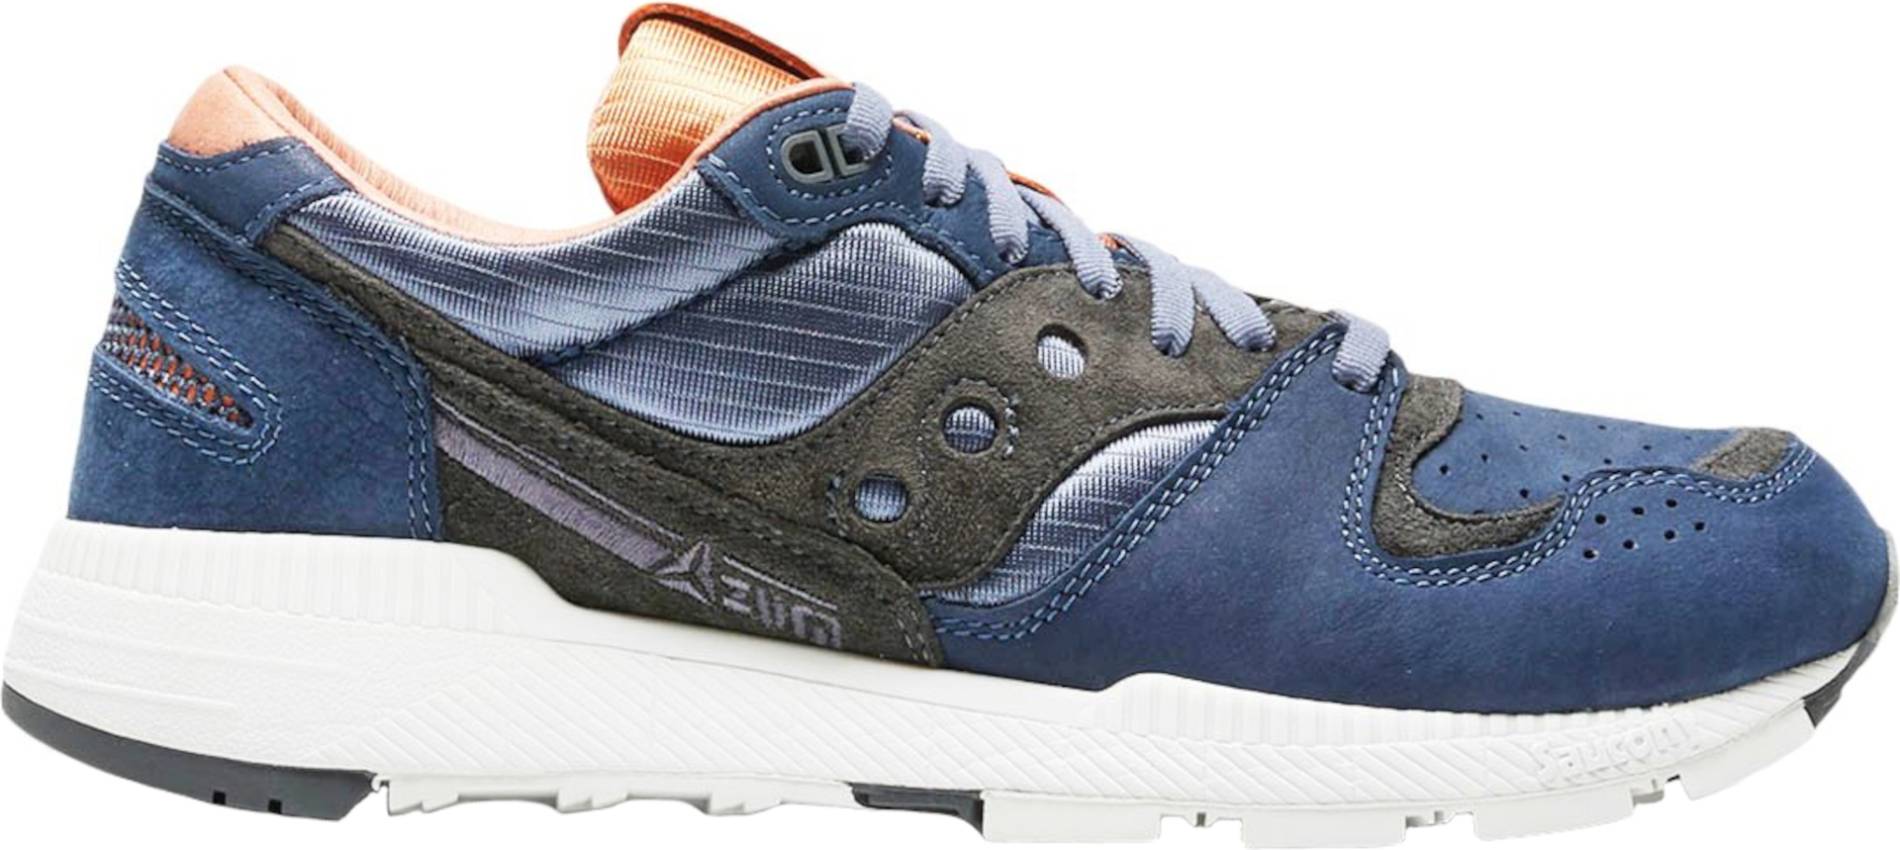 Saucony Azura Weathered sneakers in blue + yellow (only $37 